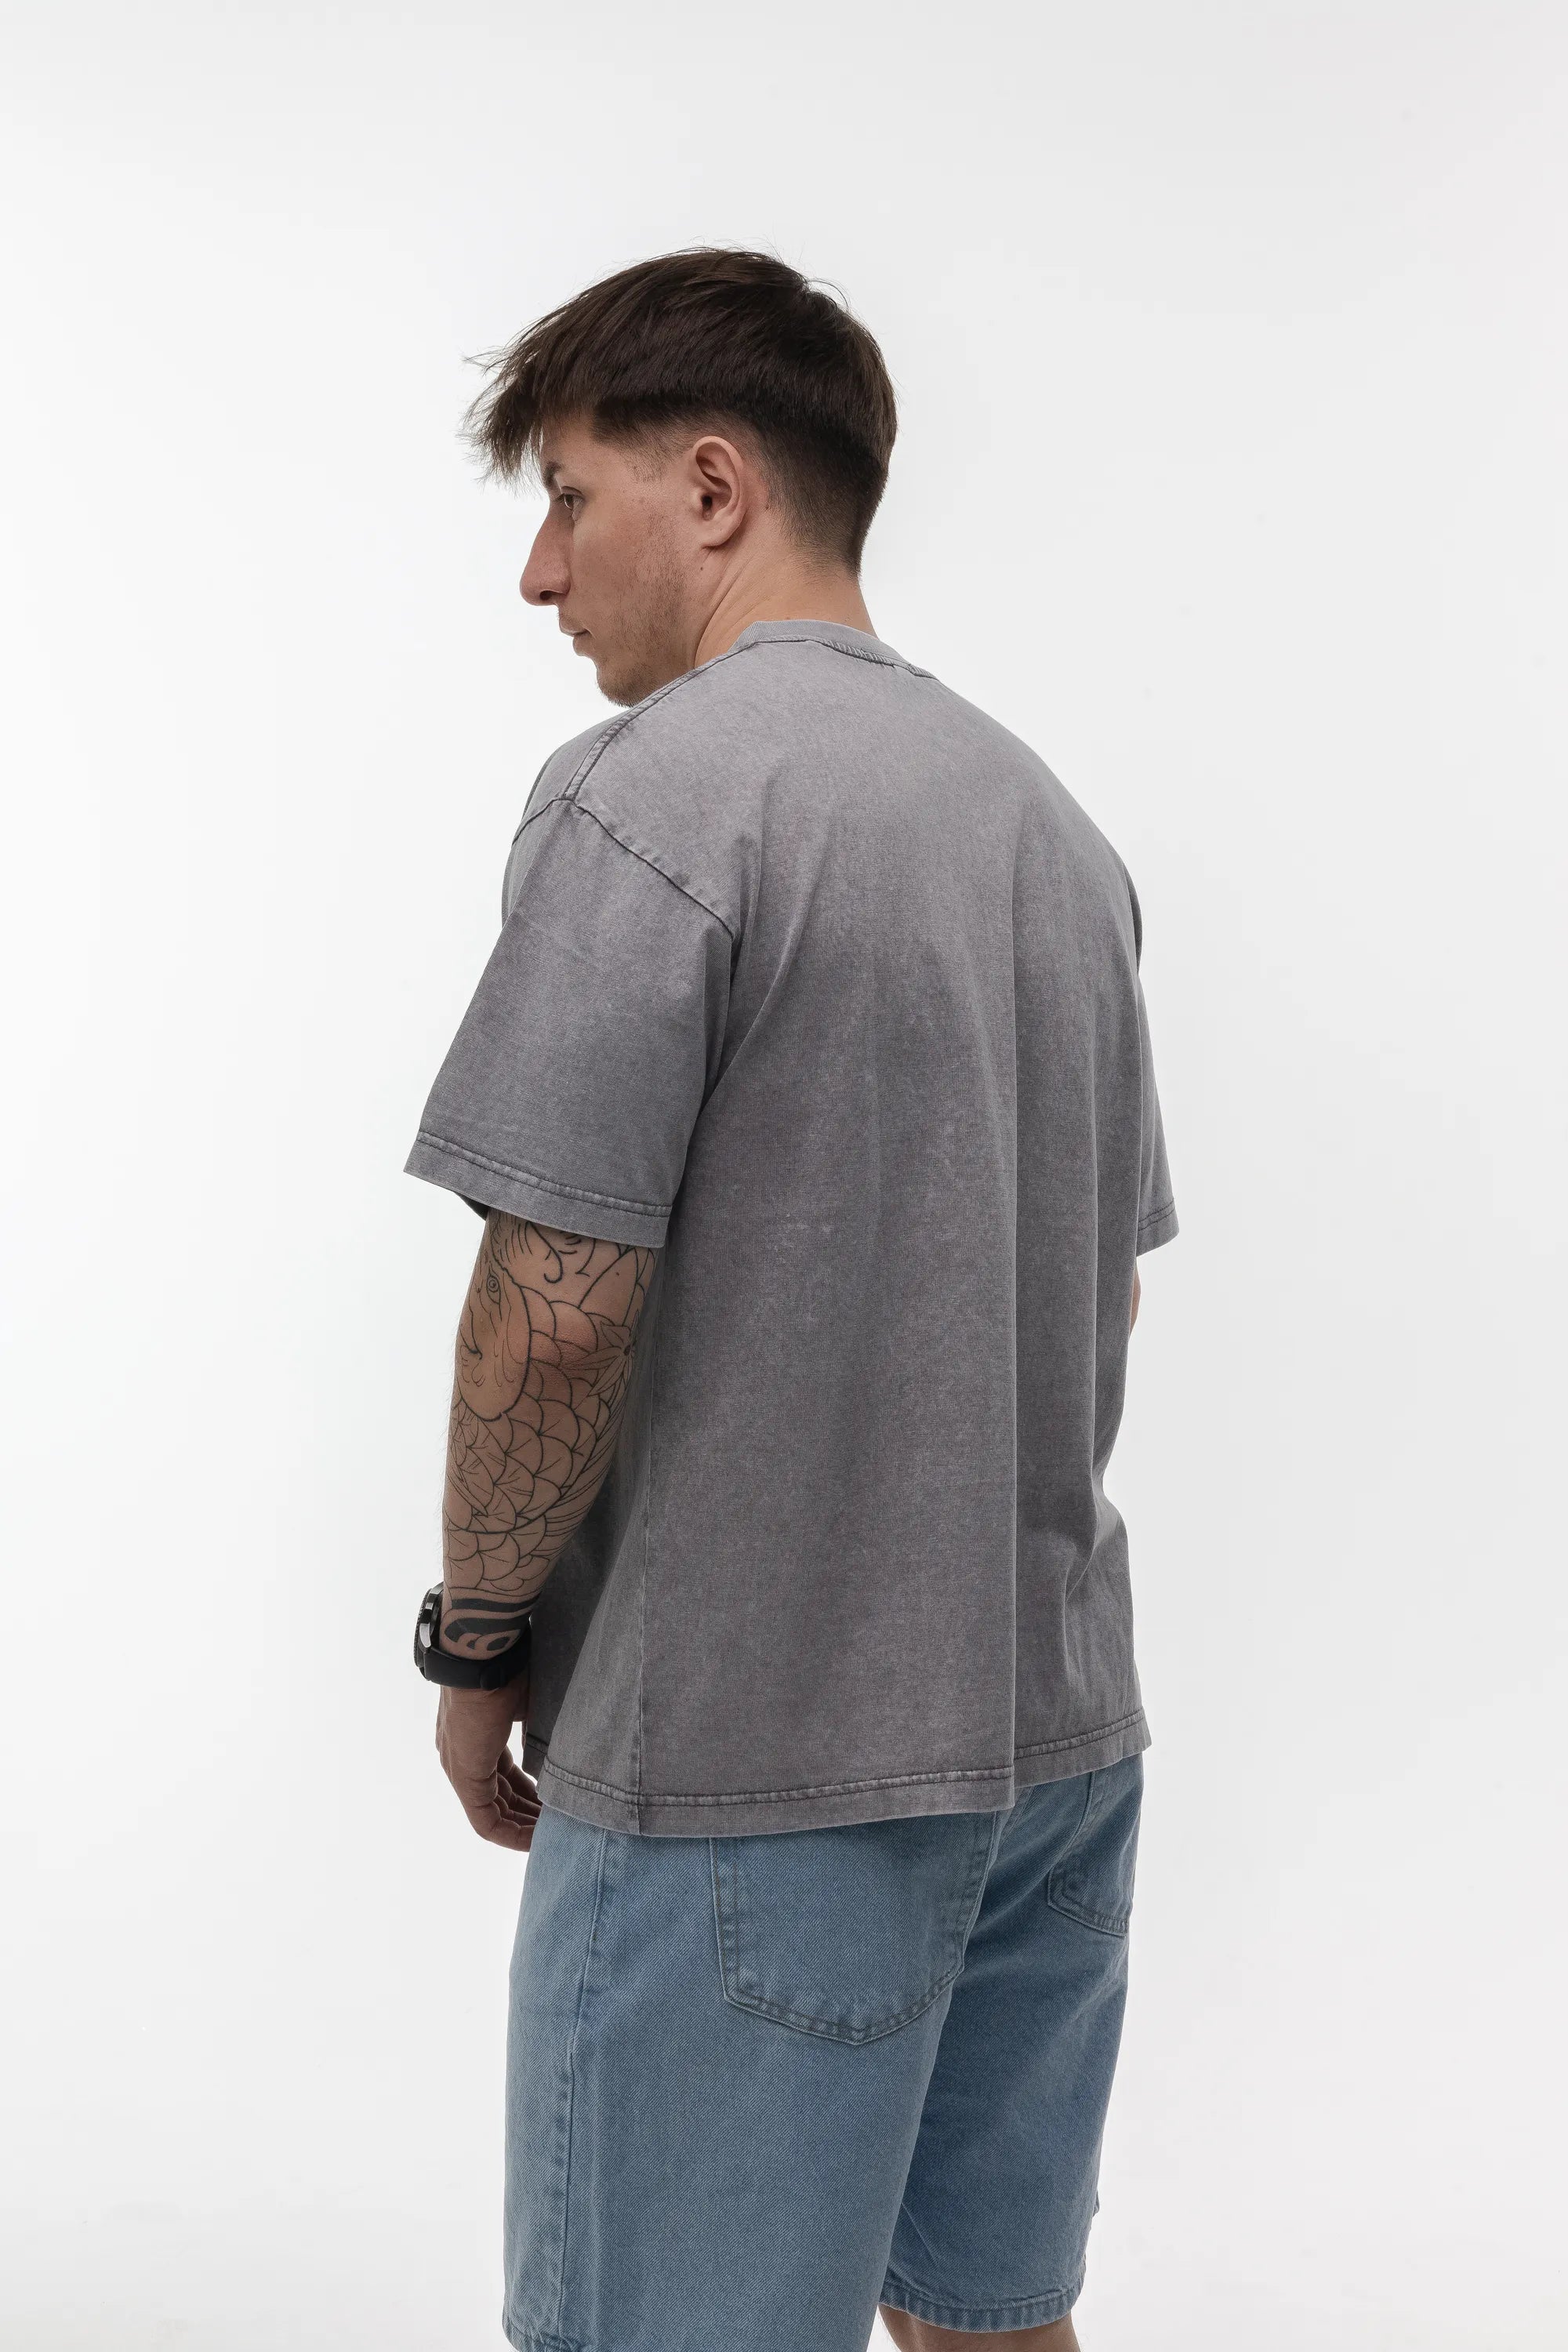 T-shirt Boiled Oversized from 100% cotton MS Washed